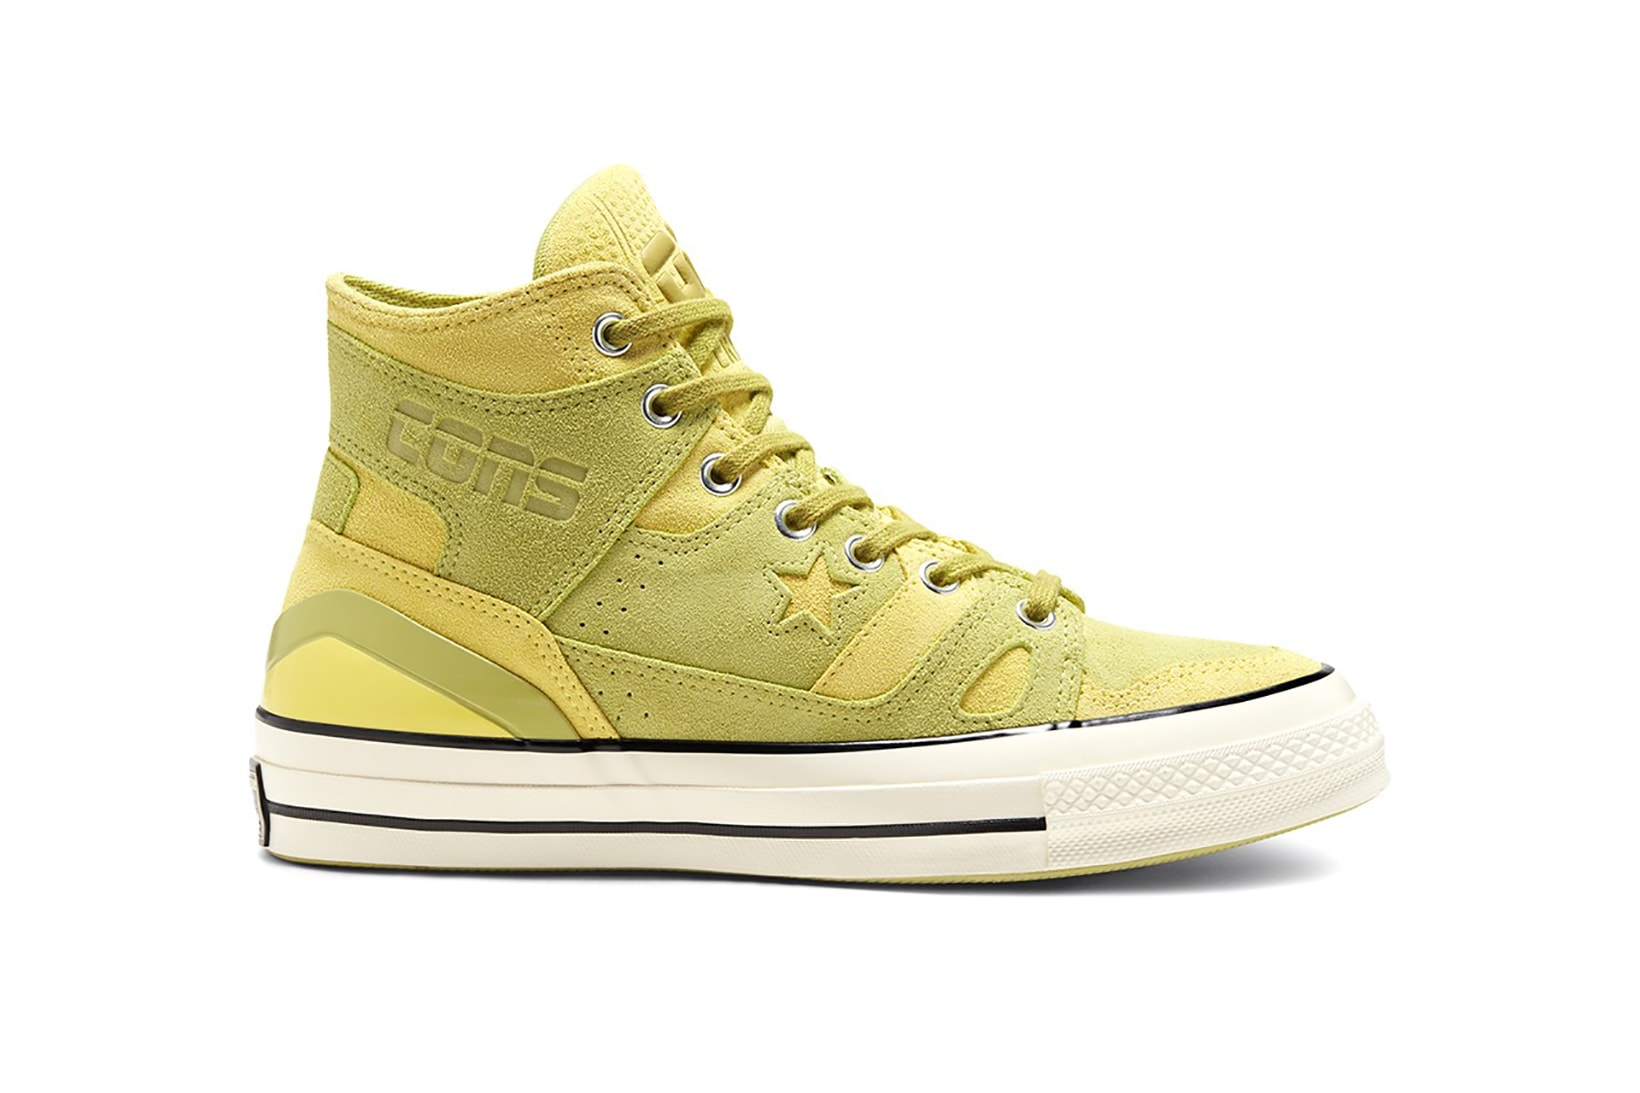 converse earth tone suede pack pro leather one star chuck 70 e260 sneakers shoes sneakerhead footwear